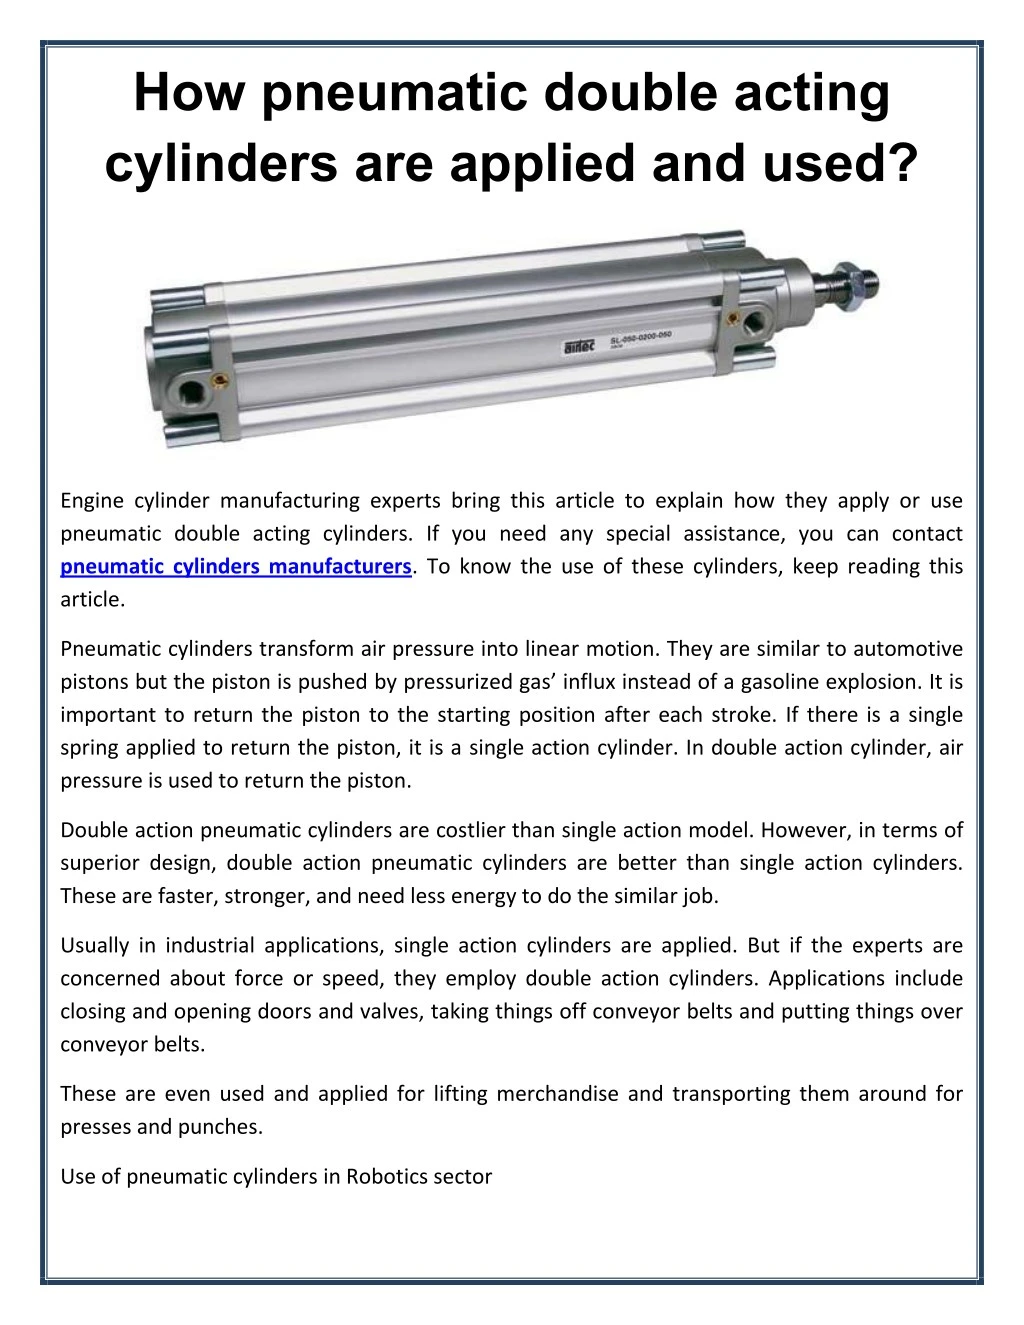 how pneumatic double acting cylinders are applied